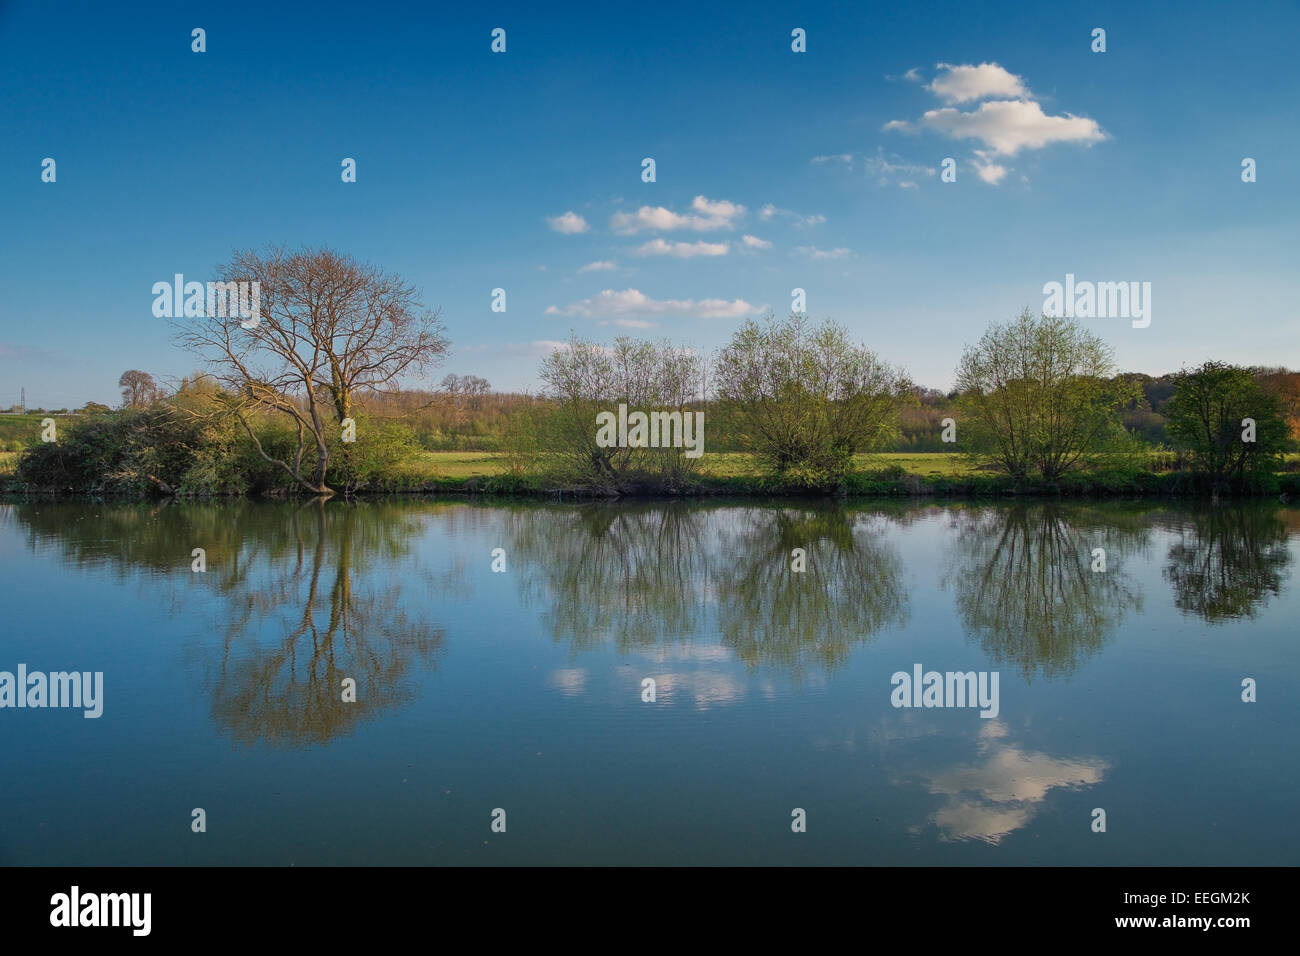 Willow trees reflected in the water along the banks of the River Thames near Abingdon, Oxfordshire. Stock Photo